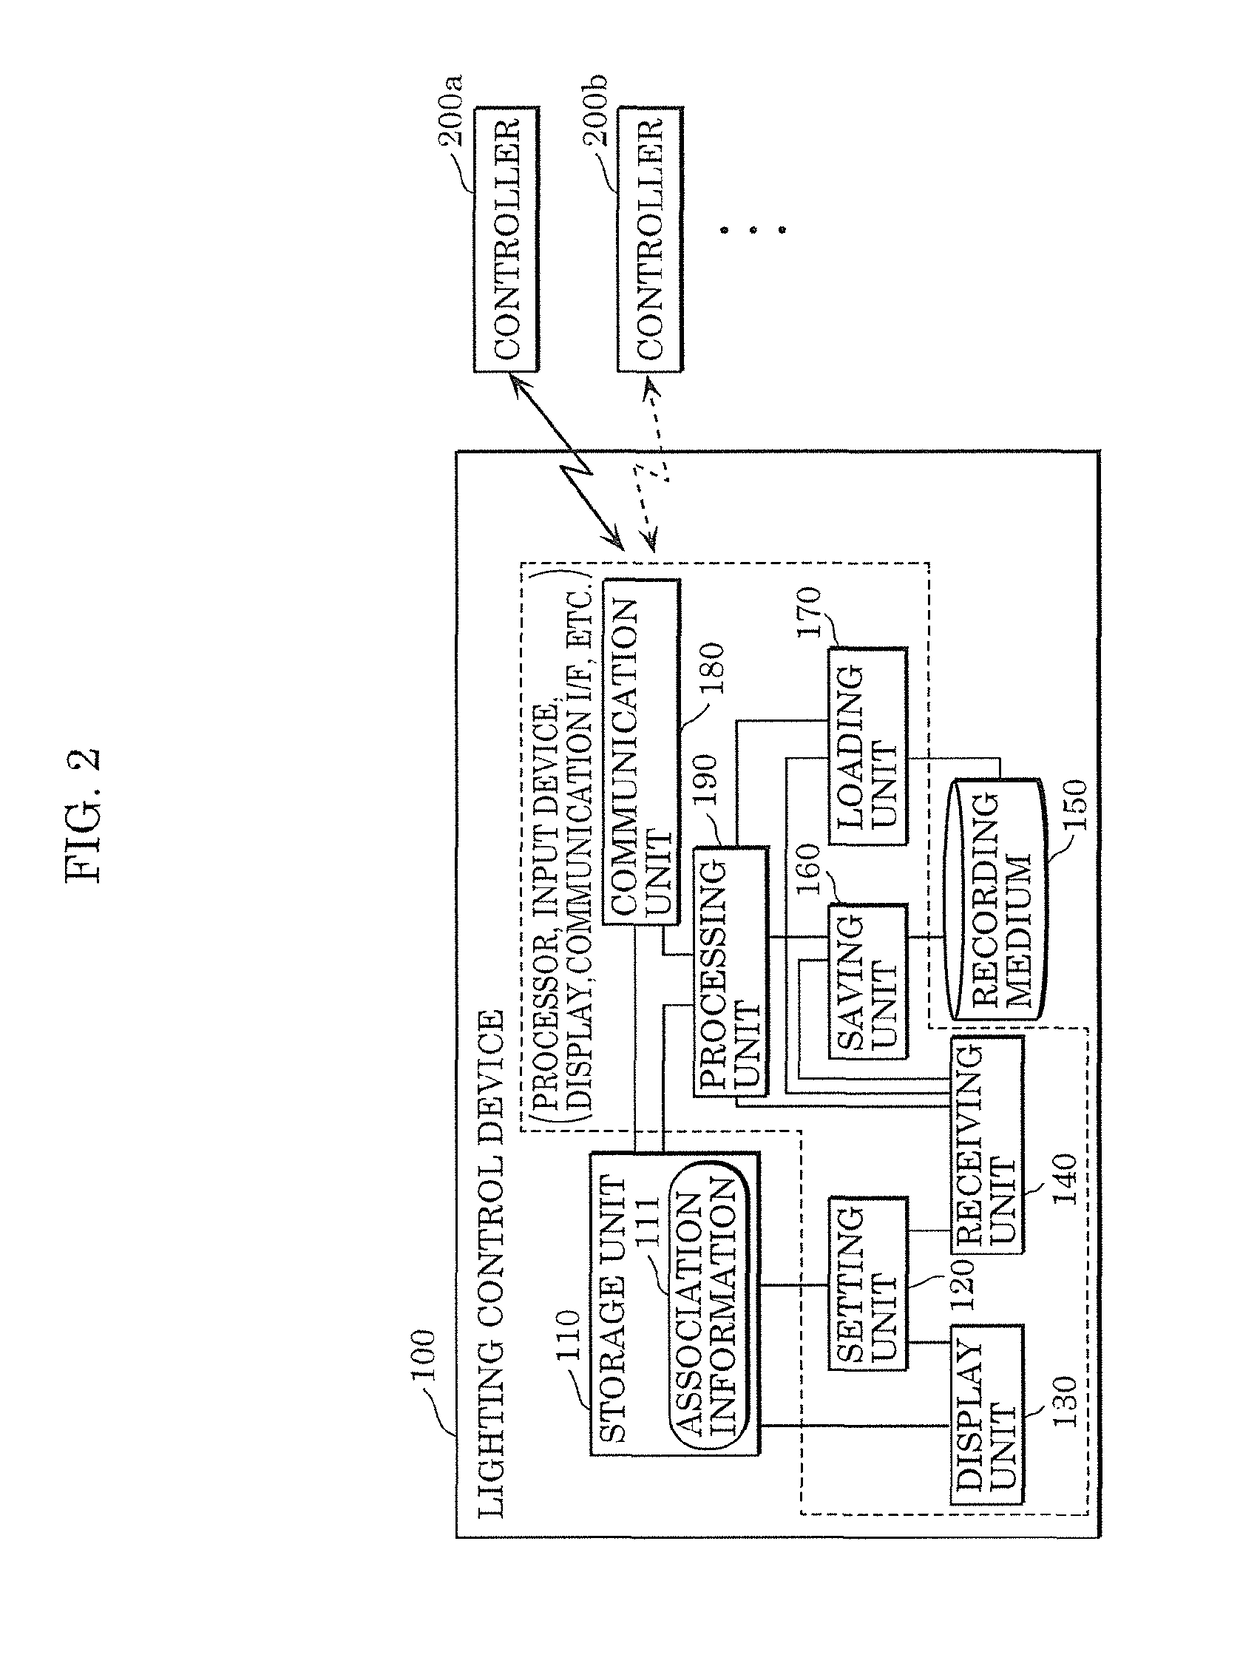 Lighting control device, lighting control system, lighting control method, and non-transitory computer-readable recording medium